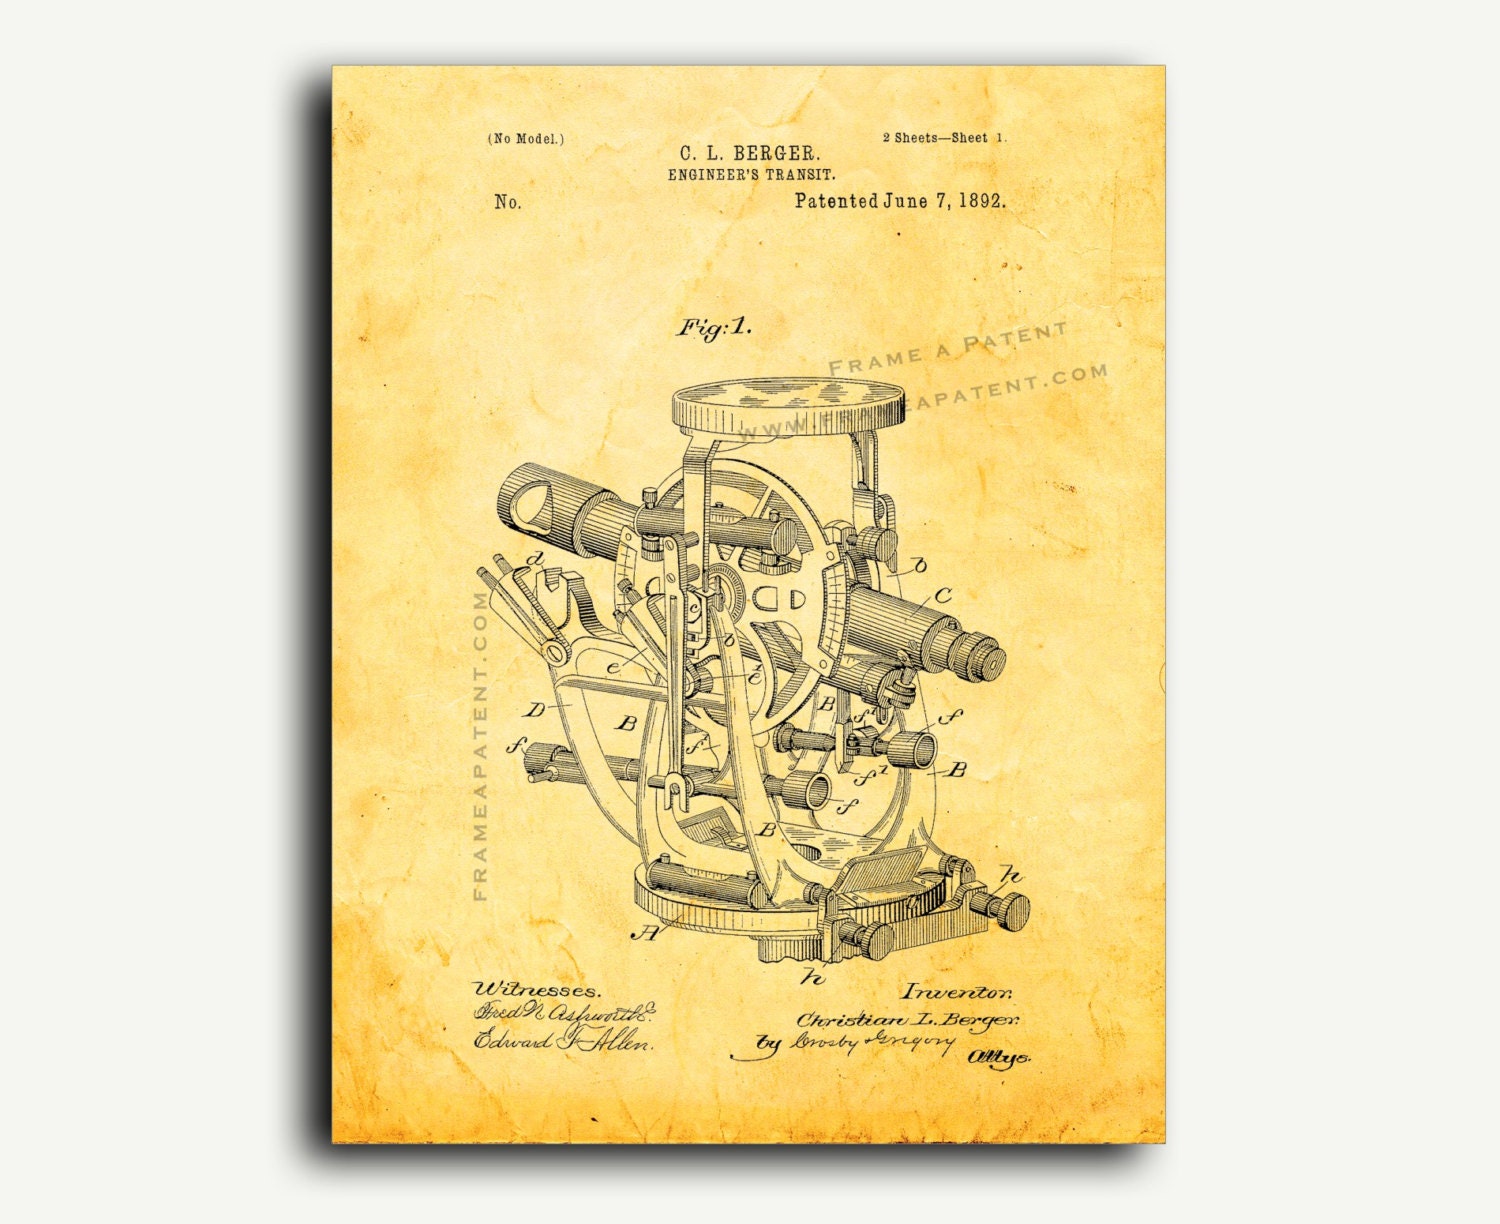 Patent Poster Engineers Transit Patent Wall Art By Frameapatent